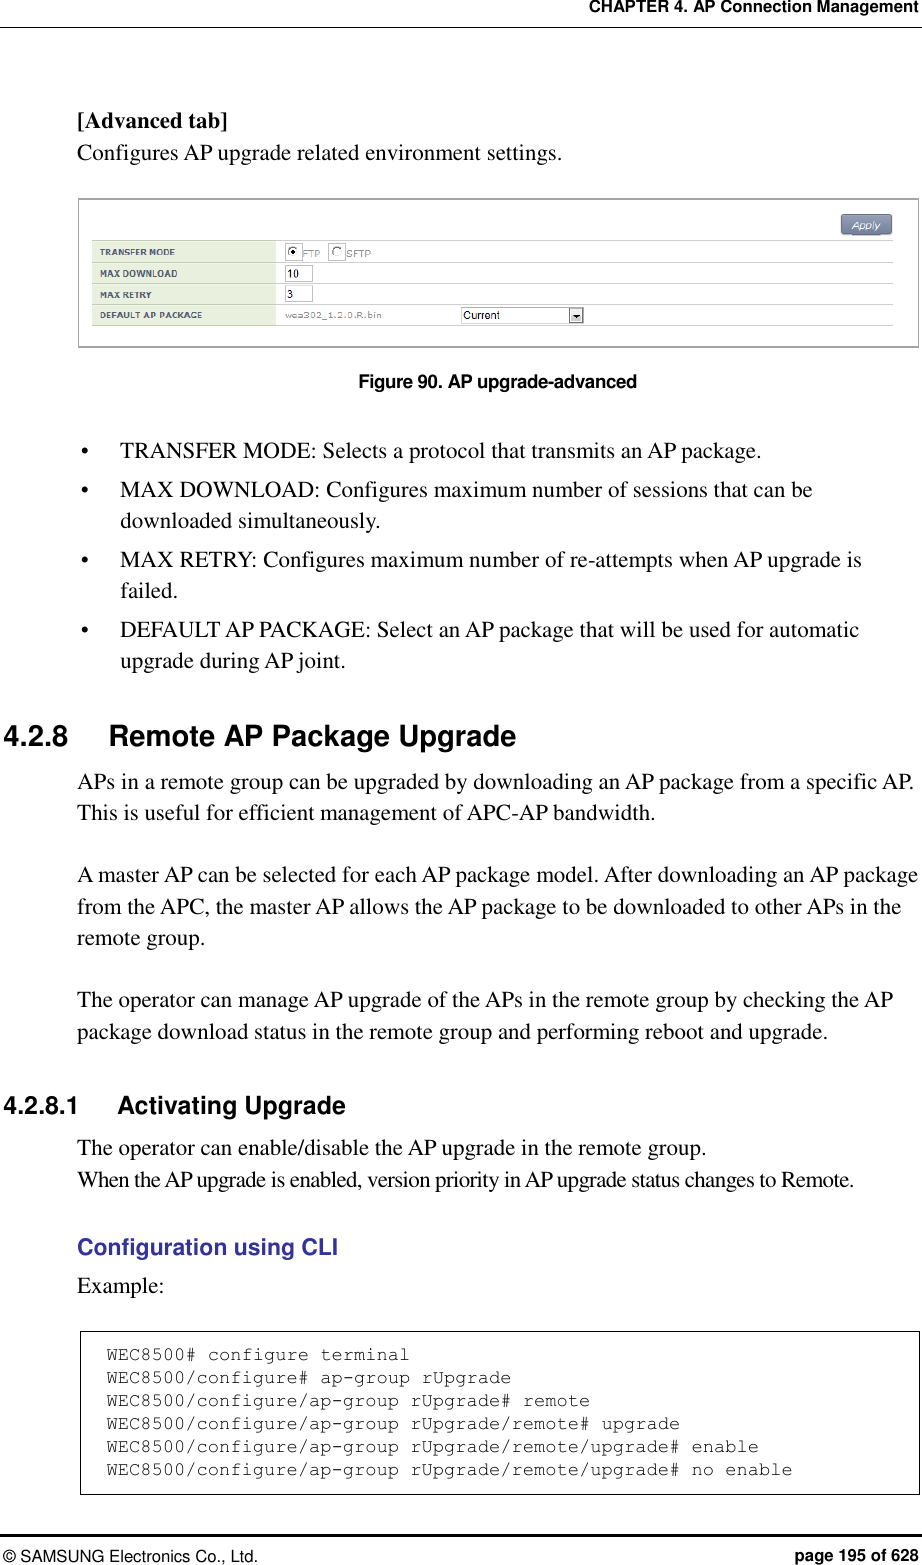 CHAPTER 4. AP Connection Management ©  SAMSUNG Electronics Co., Ltd.  page 195 of 628 [Advanced tab] Configures AP upgrade related environment settings.  Figure 90. AP upgrade-advanced   TRANSFER MODE: Selects a protocol that transmits an AP package.  MAX DOWNLOAD: Configures maximum number of sessions that can be downloaded simultaneously.  MAX RETRY: Configures maximum number of re-attempts when AP upgrade is failed.  DEFAULT AP PACKAGE: Select an AP package that will be used for automatic upgrade during AP joint.  4.2.8  Remote AP Package Upgrade APs in a remote group can be upgraded by downloading an AP package from a specific AP. This is useful for efficient management of APC-AP bandwidth.  A master AP can be selected for each AP package model. After downloading an AP package from the APC, the master AP allows the AP package to be downloaded to other APs in the remote group.  The operator can manage AP upgrade of the APs in the remote group by checking the AP package download status in the remote group and performing reboot and upgrade.  4.2.8.1  Activating Upgrade The operator can enable/disable the AP upgrade in the remote group. When the AP upgrade is enabled, version priority in AP upgrade status changes to Remote.  Configuration using CLI   Example:  WEC8500# configure terminal WEC8500/configure# ap-group rUpgrade WEC8500/configure/ap-group rUpgrade# remote WEC8500/configure/ap-group rUpgrade/remote# upgrade WEC8500/configure/ap-group rUpgrade/remote/upgrade# enable WEC8500/configure/ap-group rUpgrade/remote/upgrade# no enable 